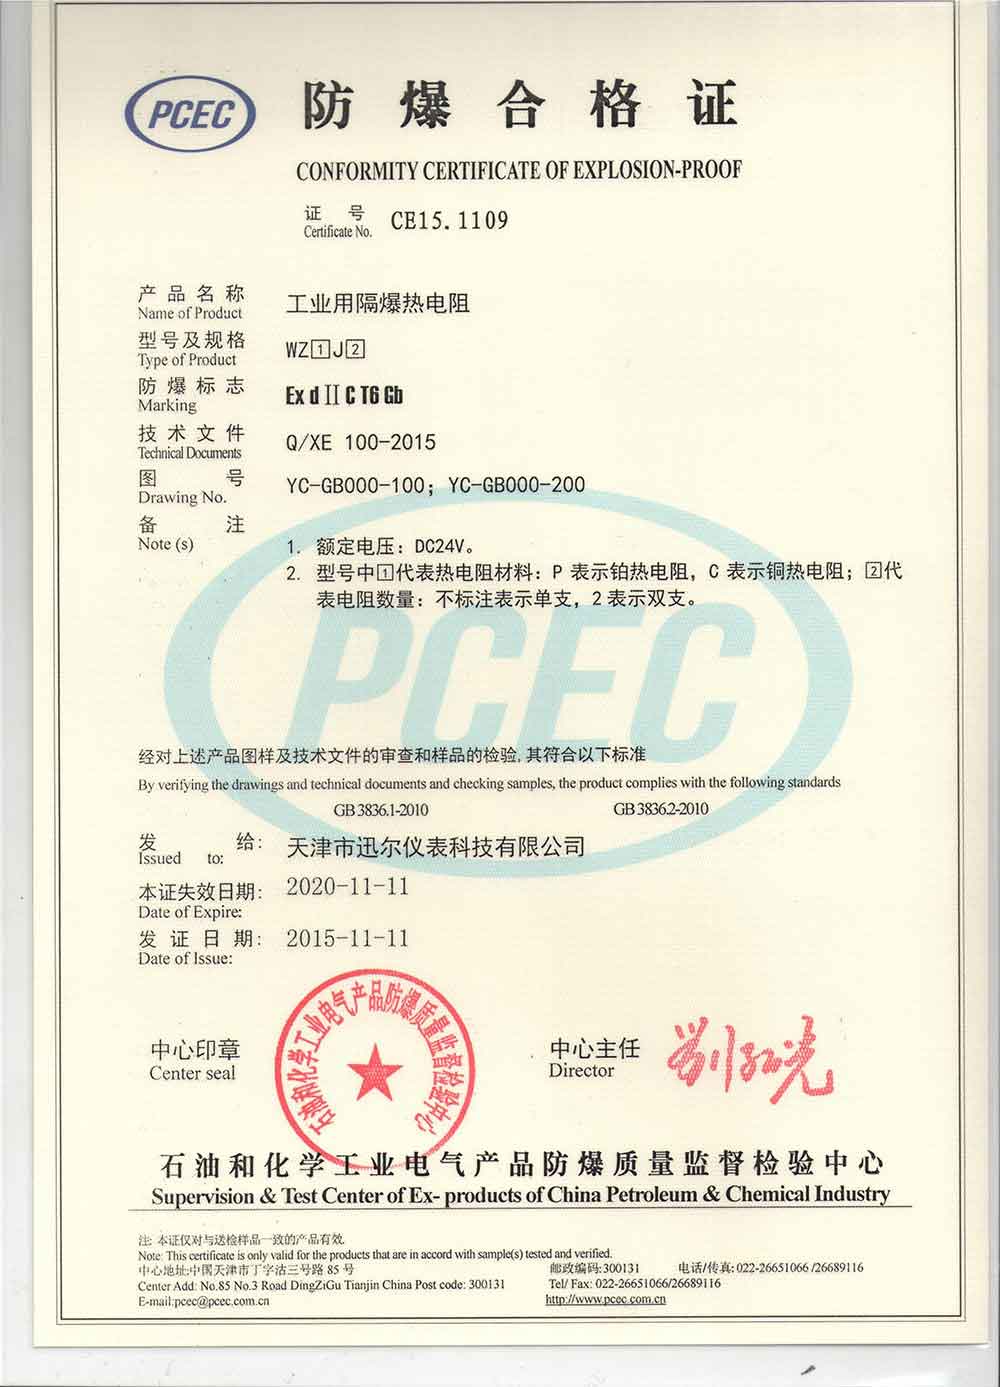  conformity certificate of explosion-proof---thermal resistance